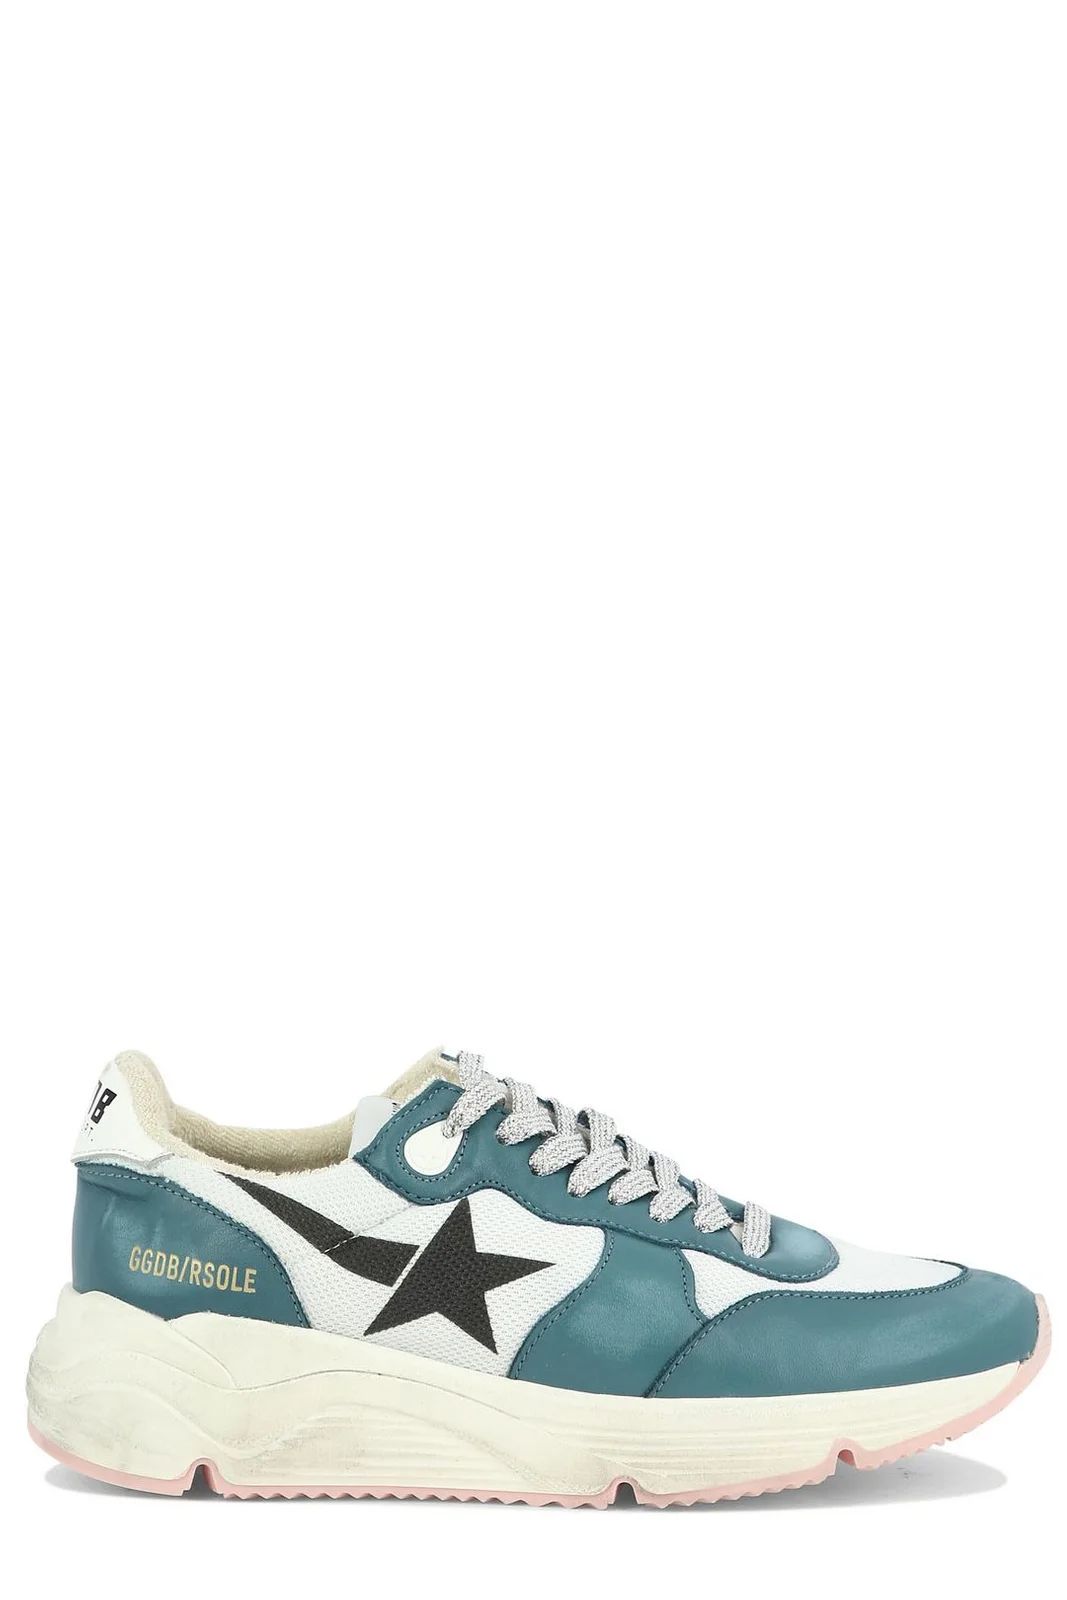 Golden Goose Deluxe Brand Star Printed Lace-Up Sneakers | Cettire Global